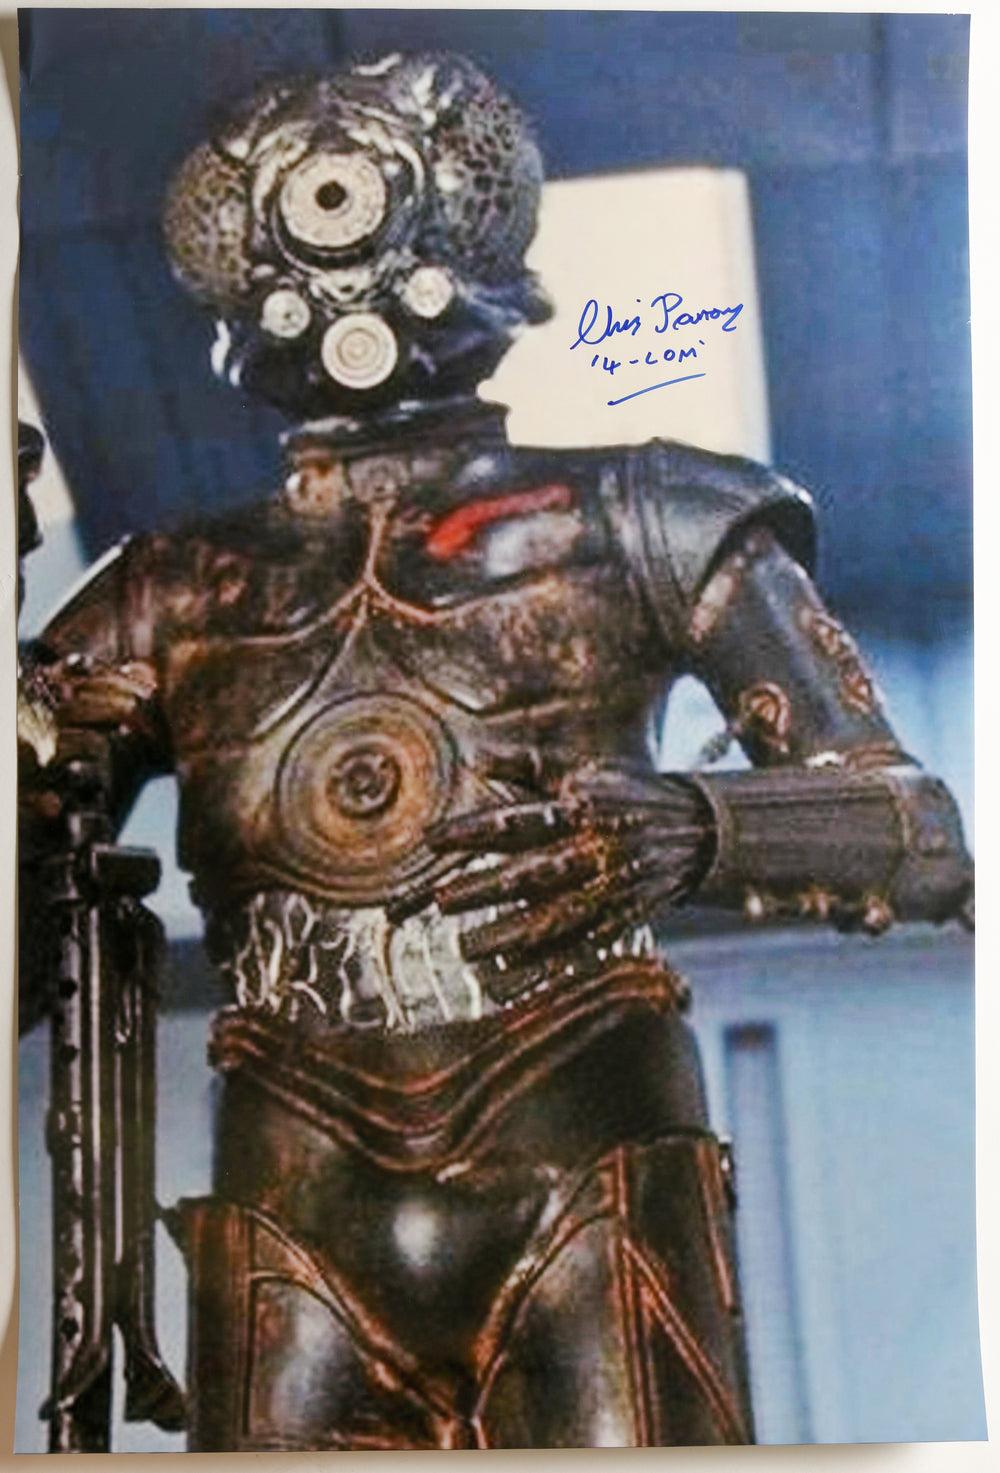 Chris Parsons as 4-LOM Bounty Hunter in Star Wars: The Empire Strikes Back Signed 20x30 Poster with Character Name